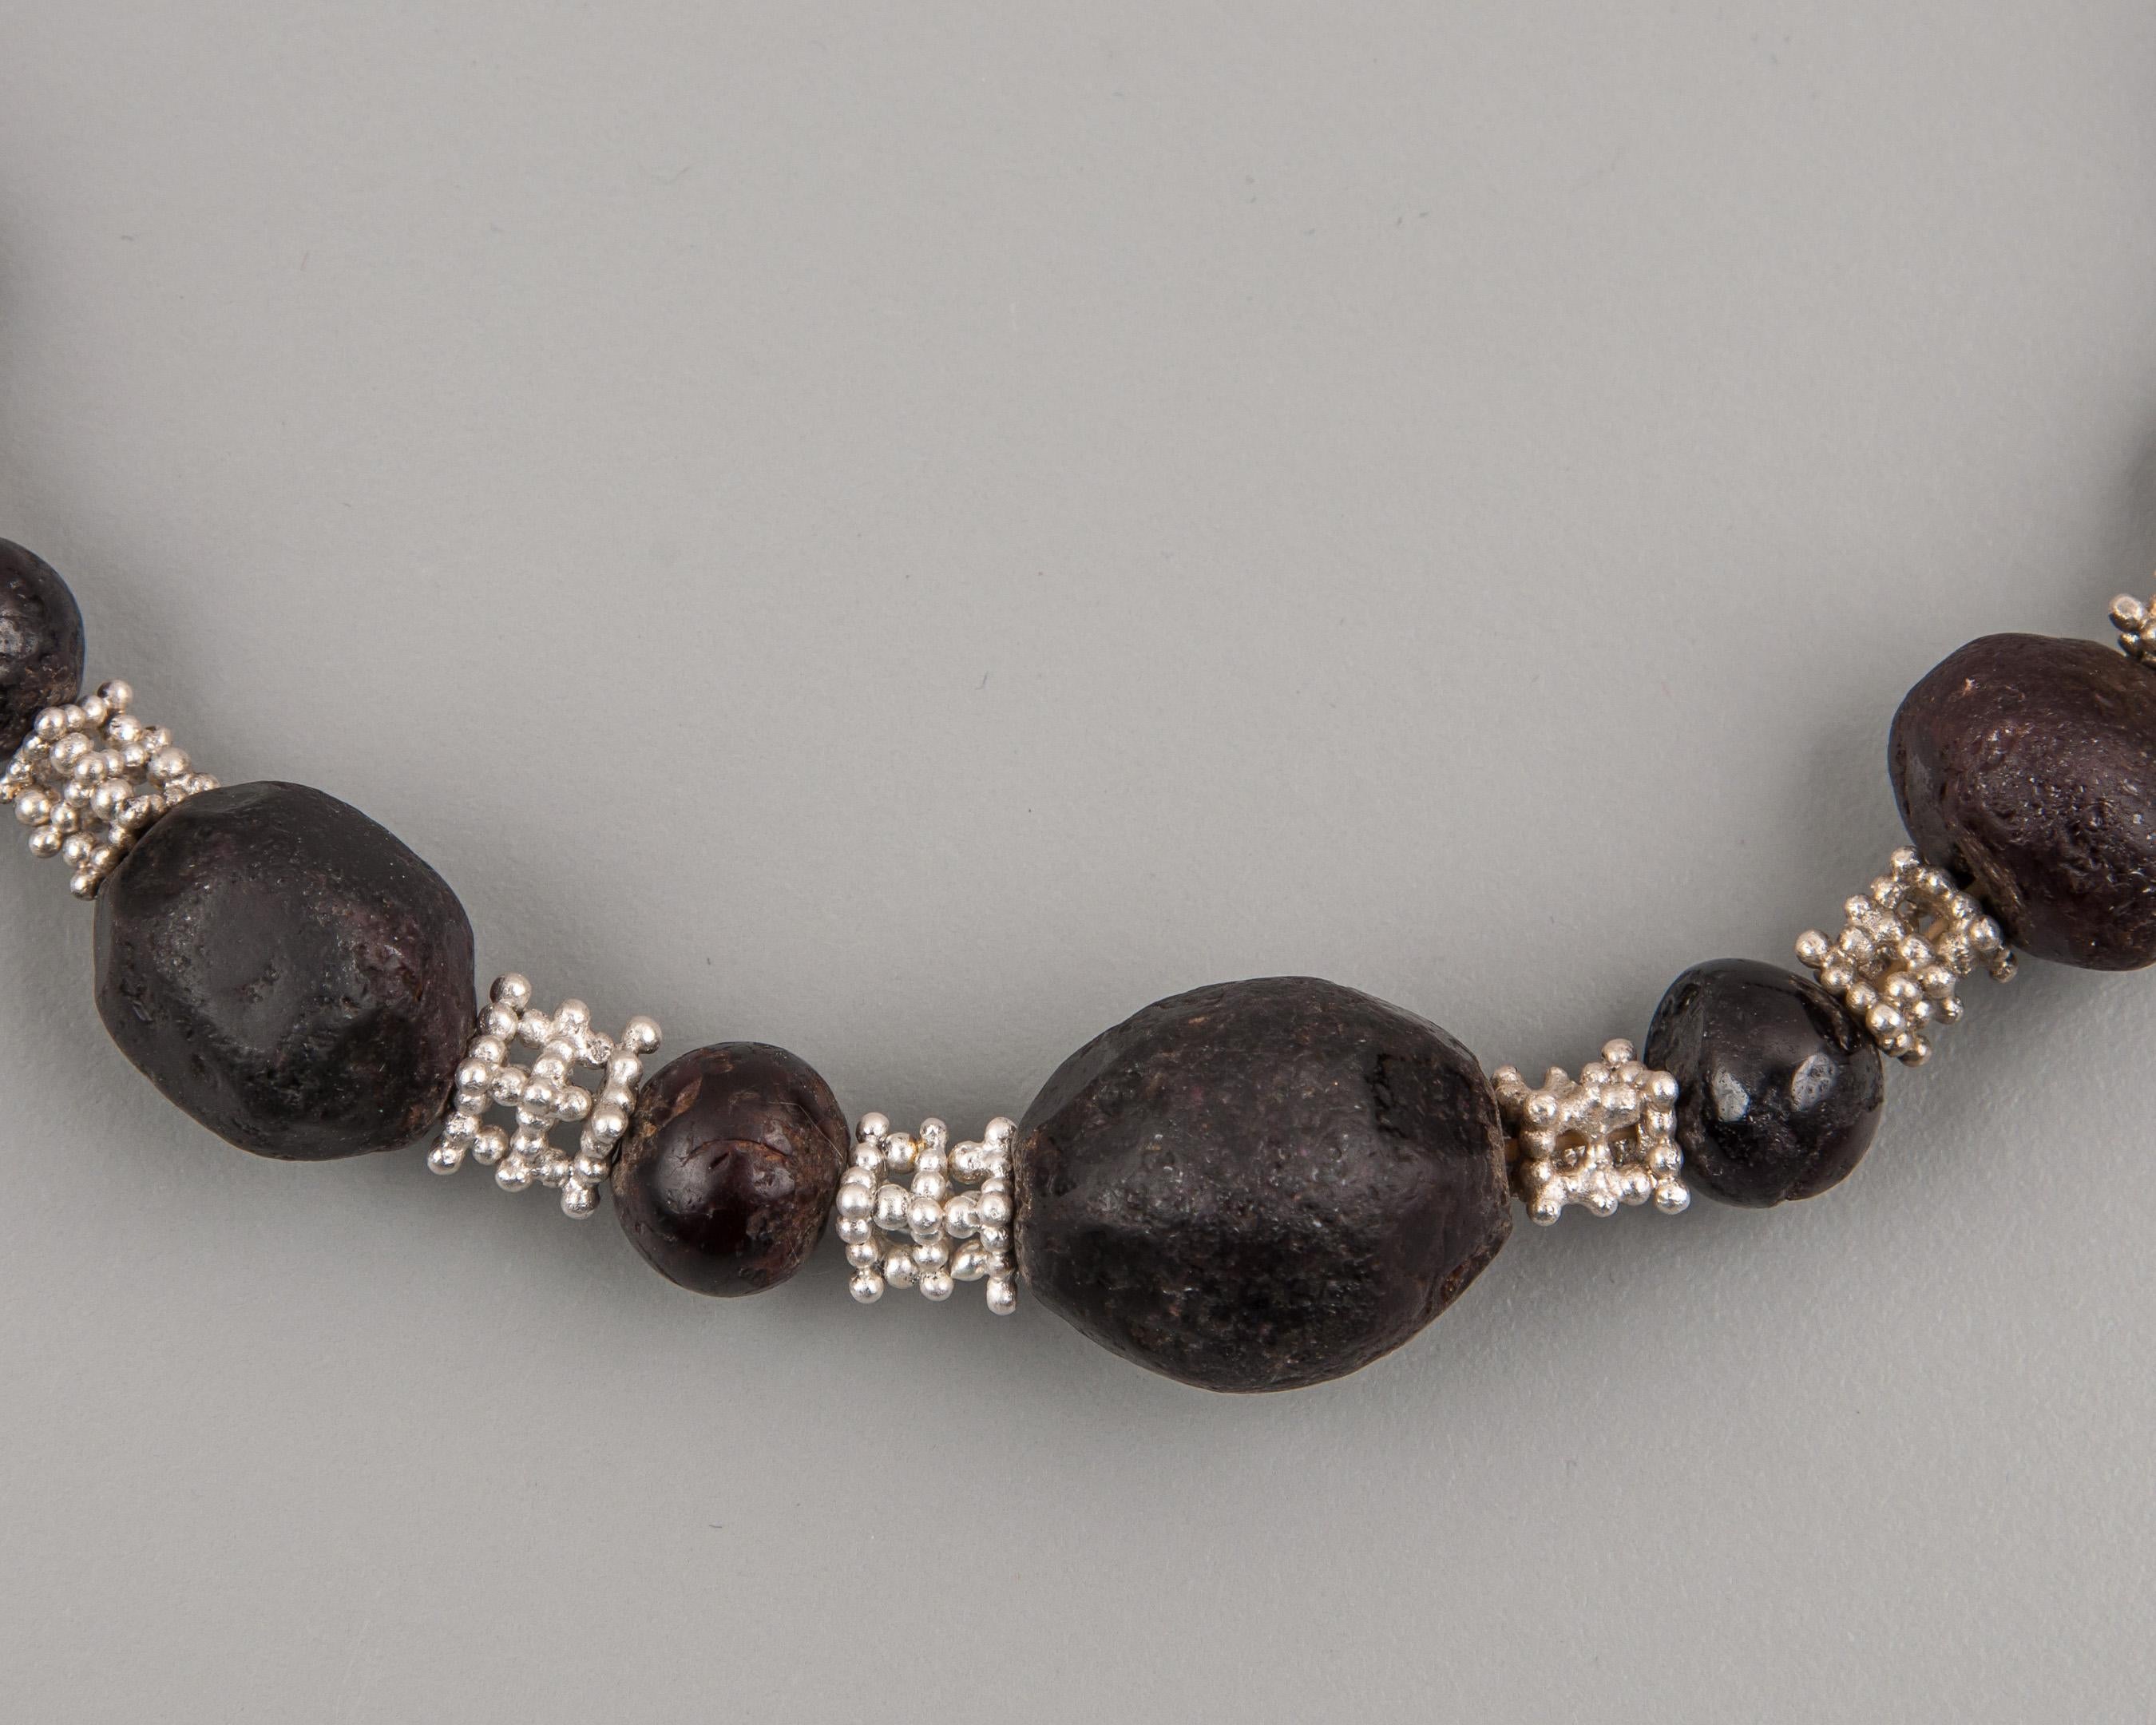 Twenty-three ancient garnet beads alternating with granulated silver beads composed of forty-four silver granules fused together in five layers to form a rectangular solid with two openings in each face. The garnet beads are large and show much